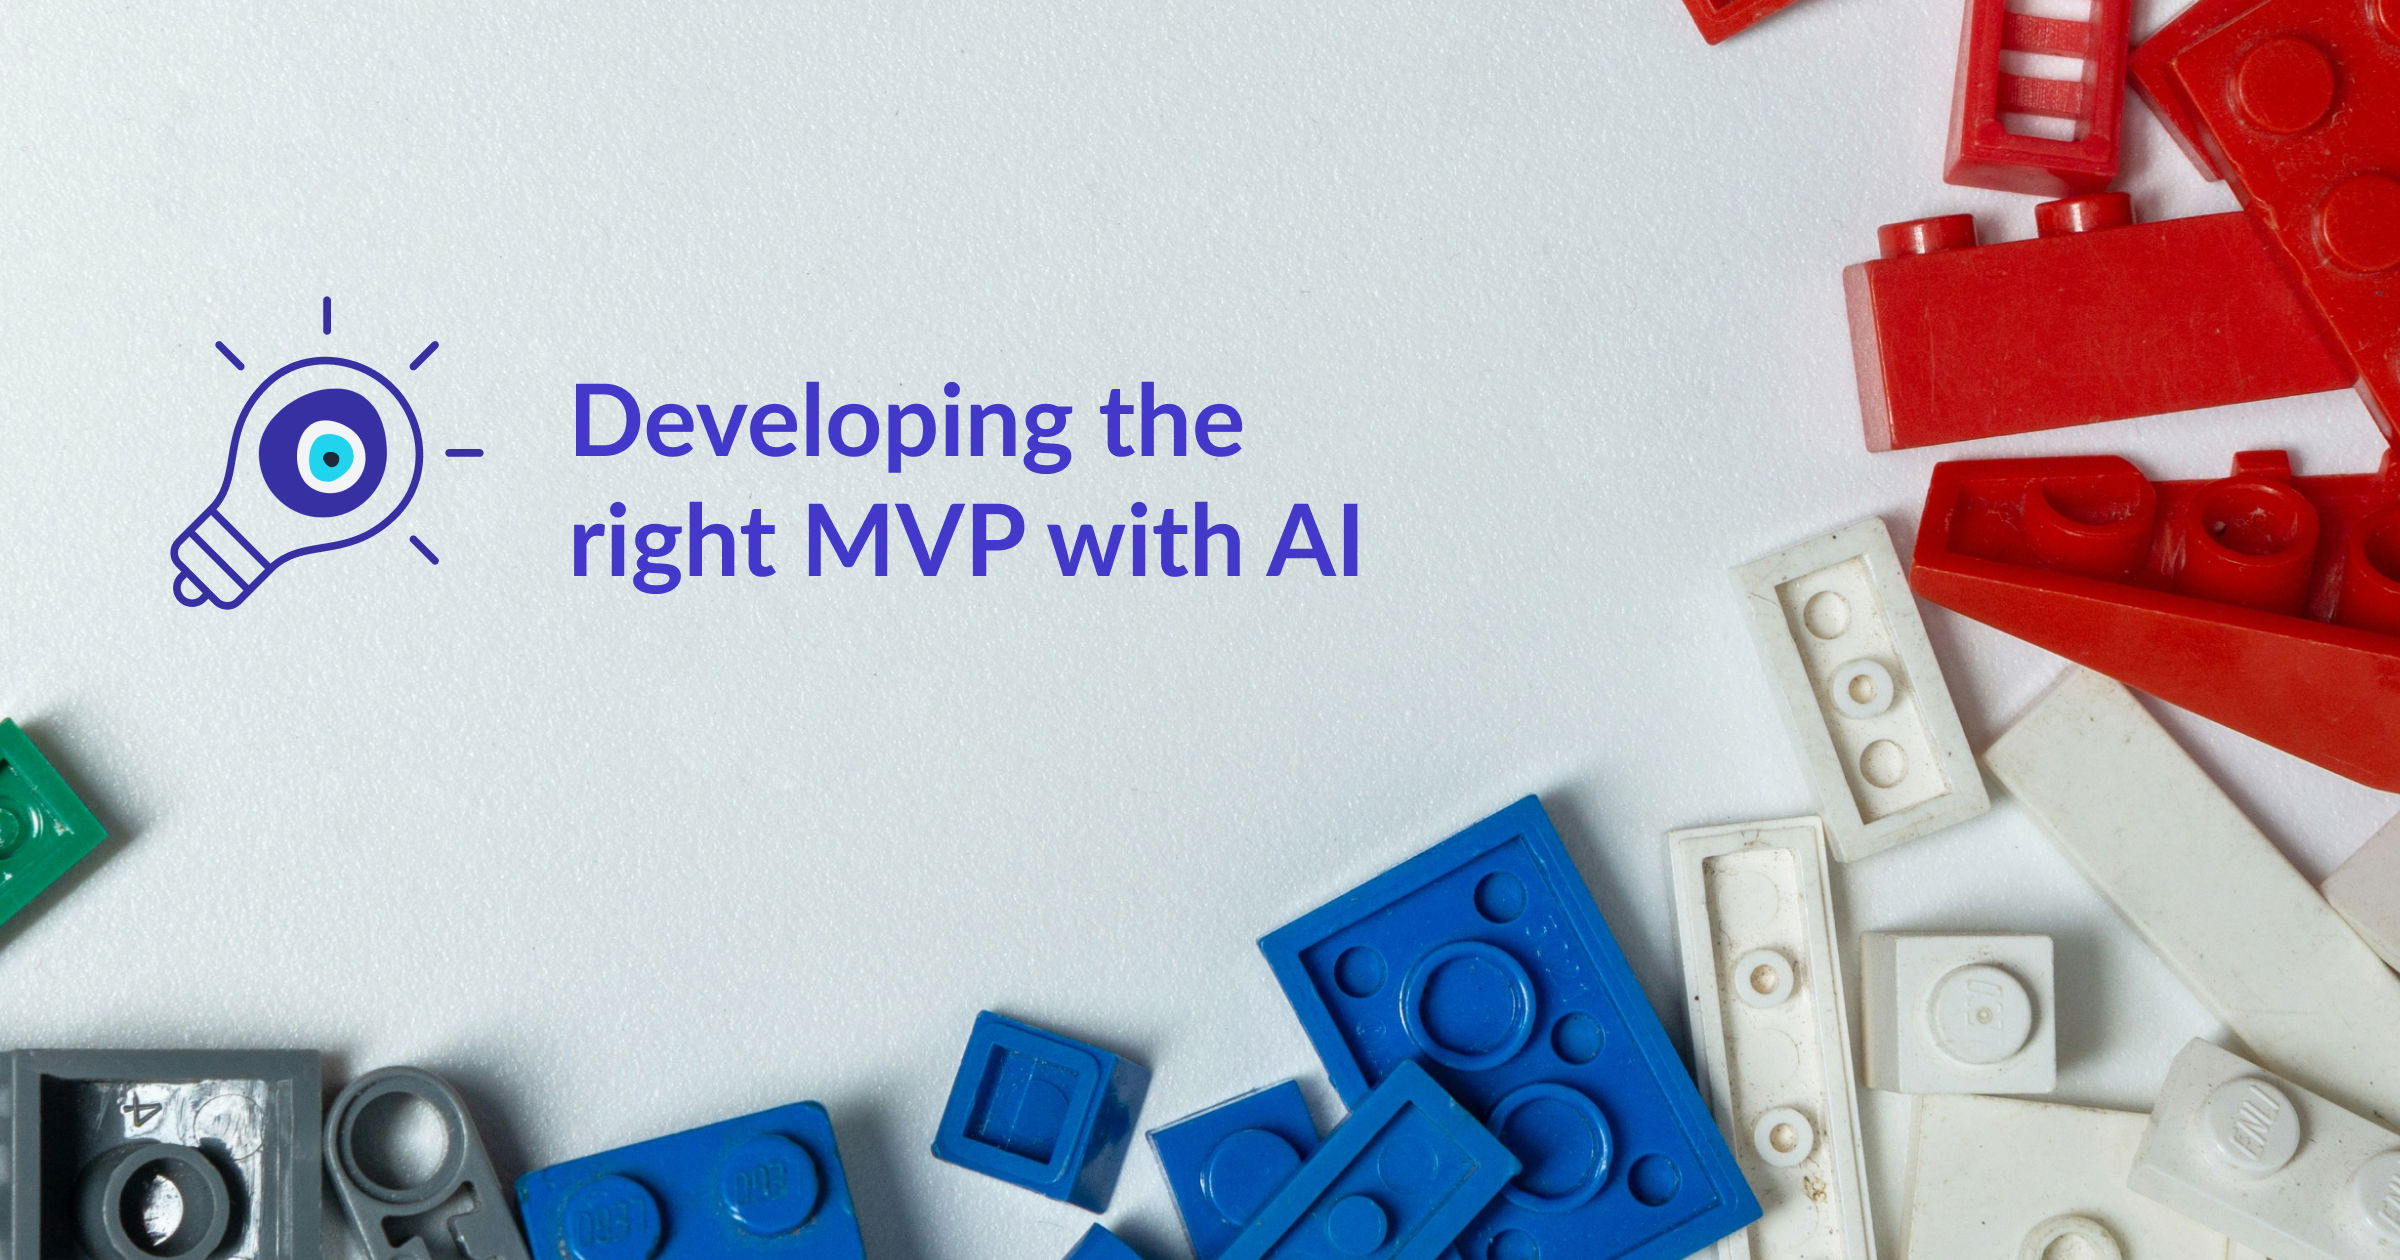 Text saying "Developing the right MVP with AI" and image of multi-colored lego bricks